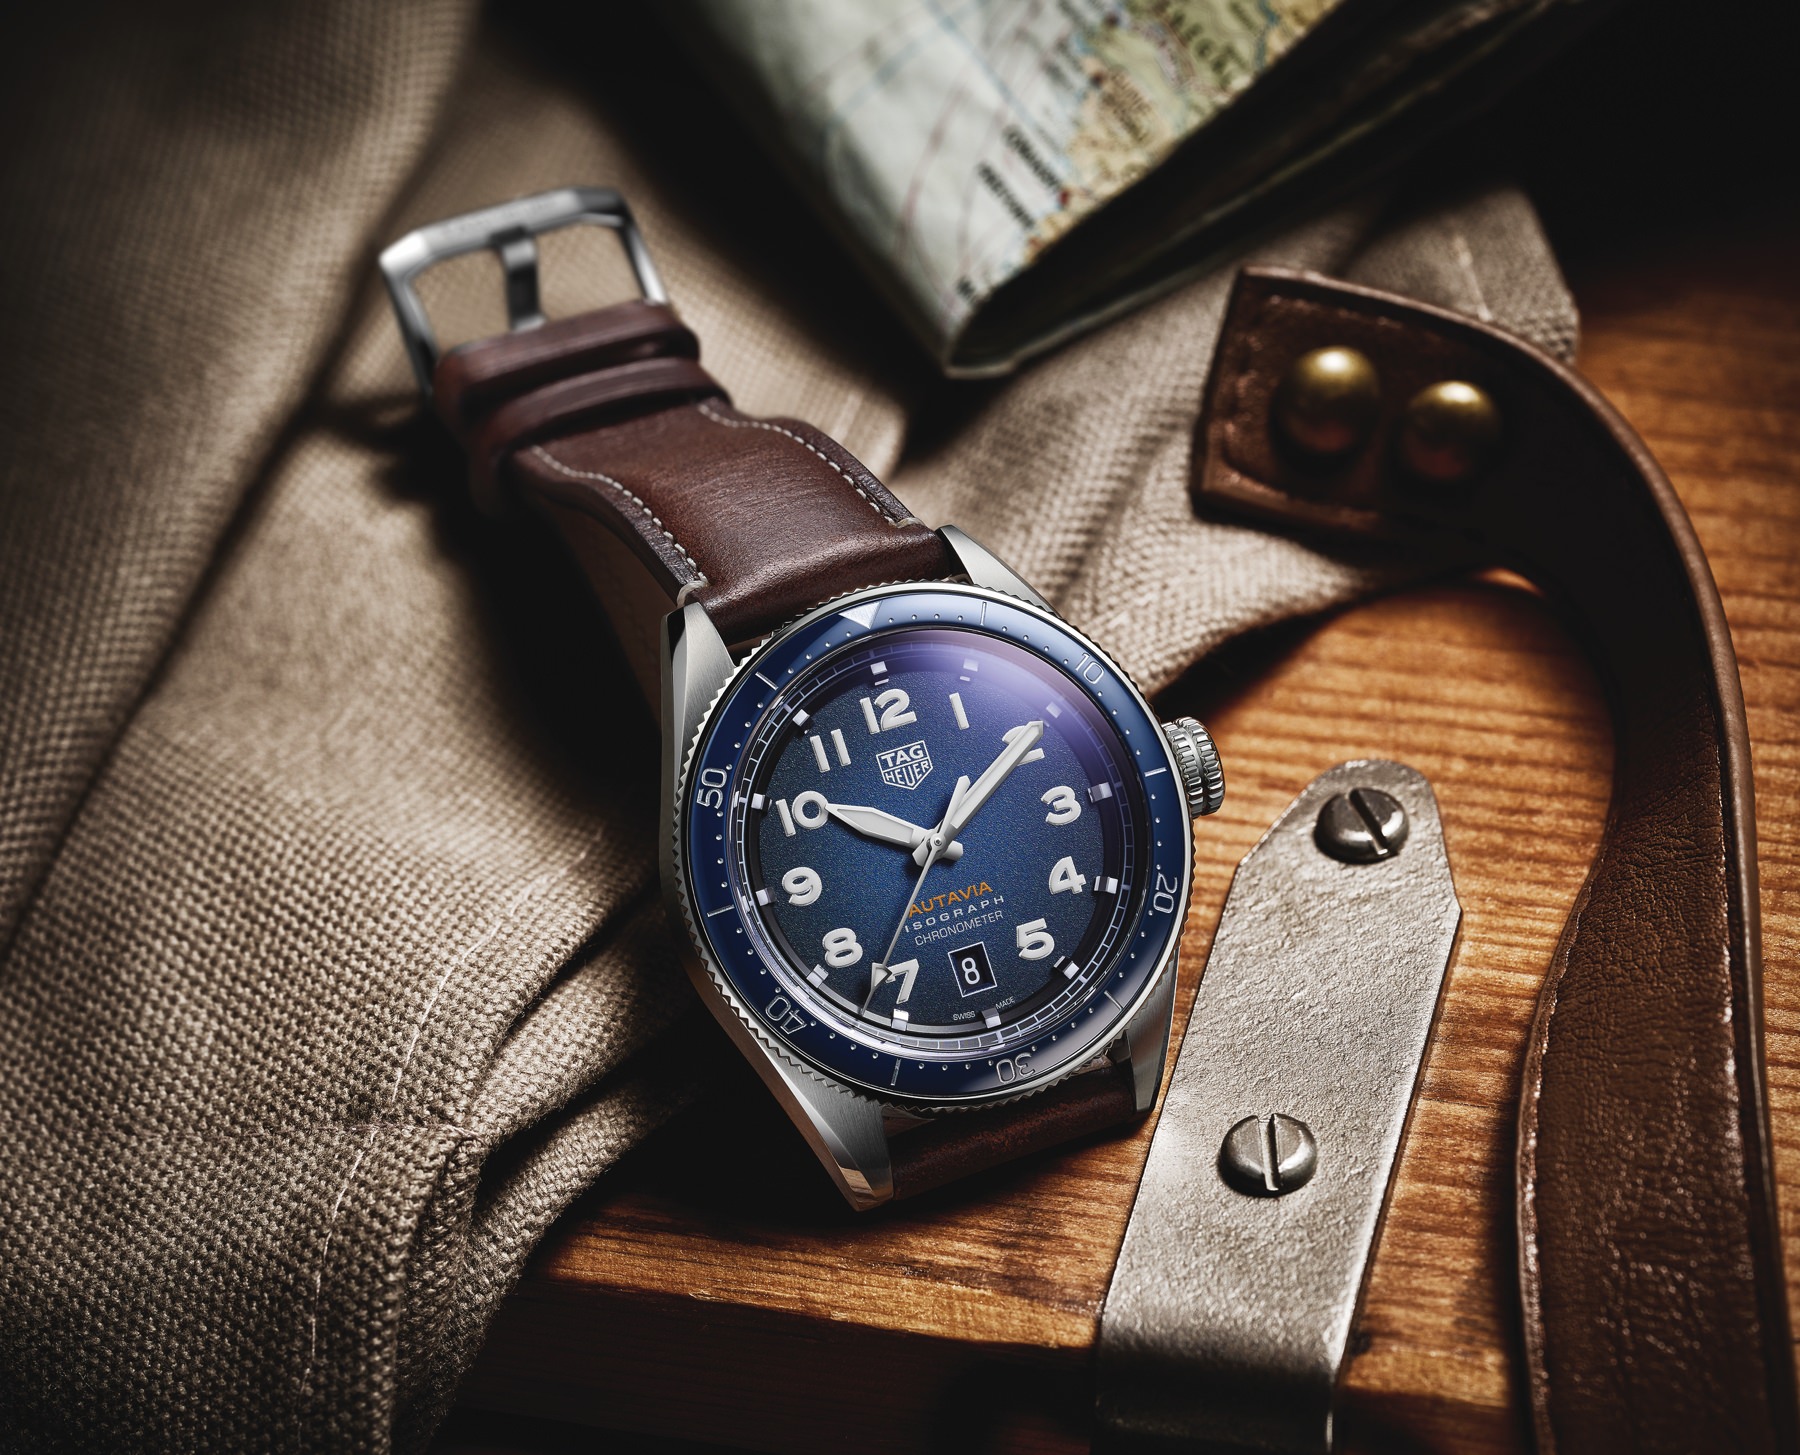 Moern heirloom timepieces from TAG Heuer for Father's Day